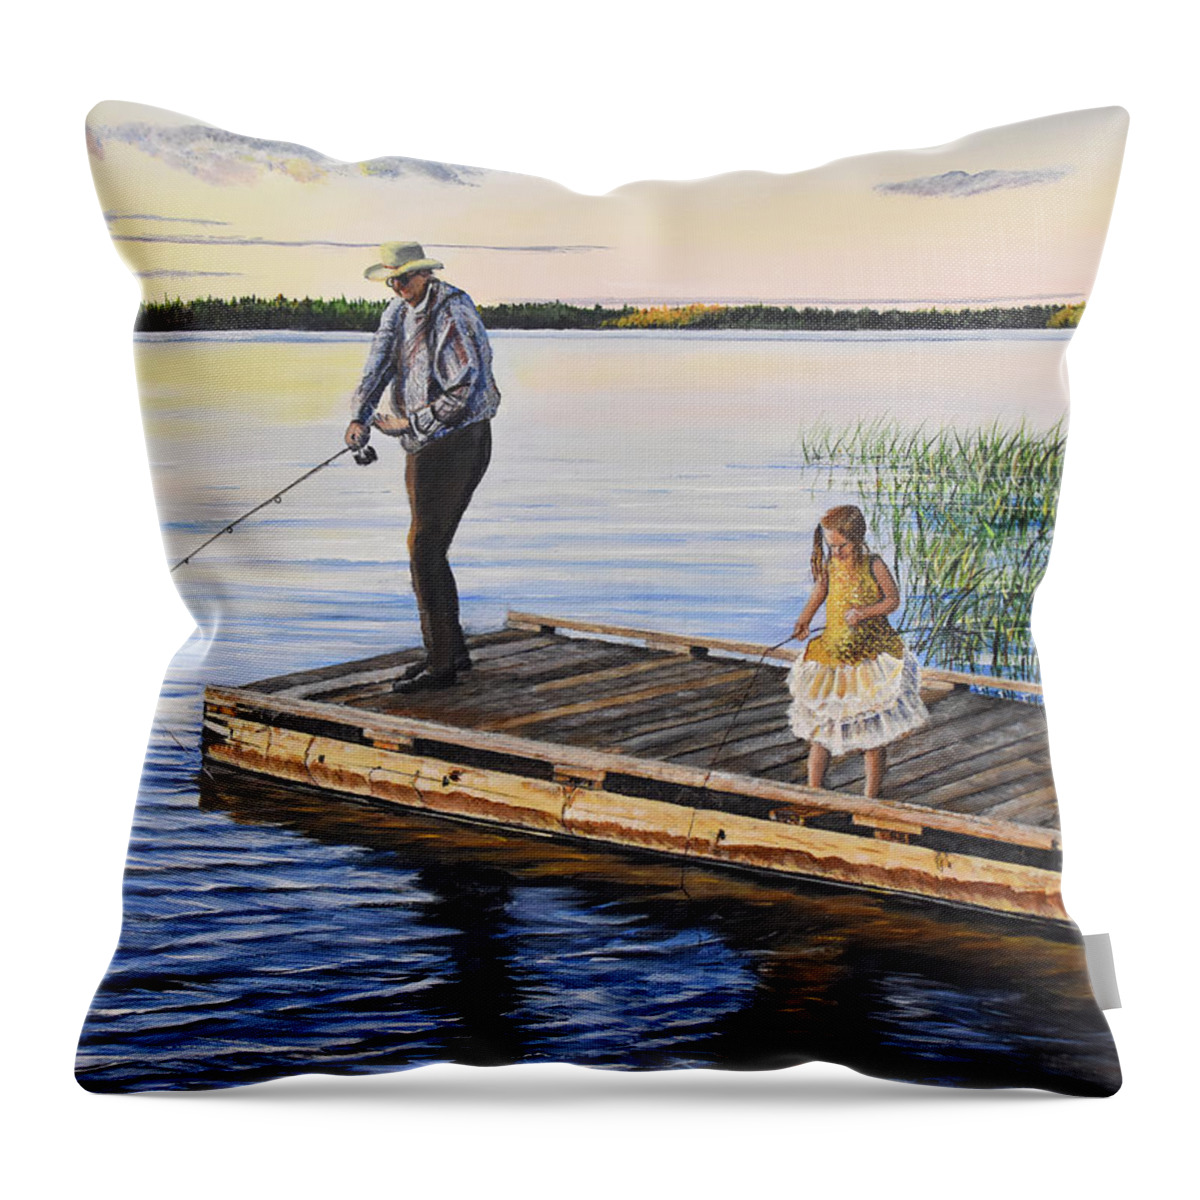 Fishing Throw Pillow featuring the painting Fishing With A Ballerina by Marilyn McNish